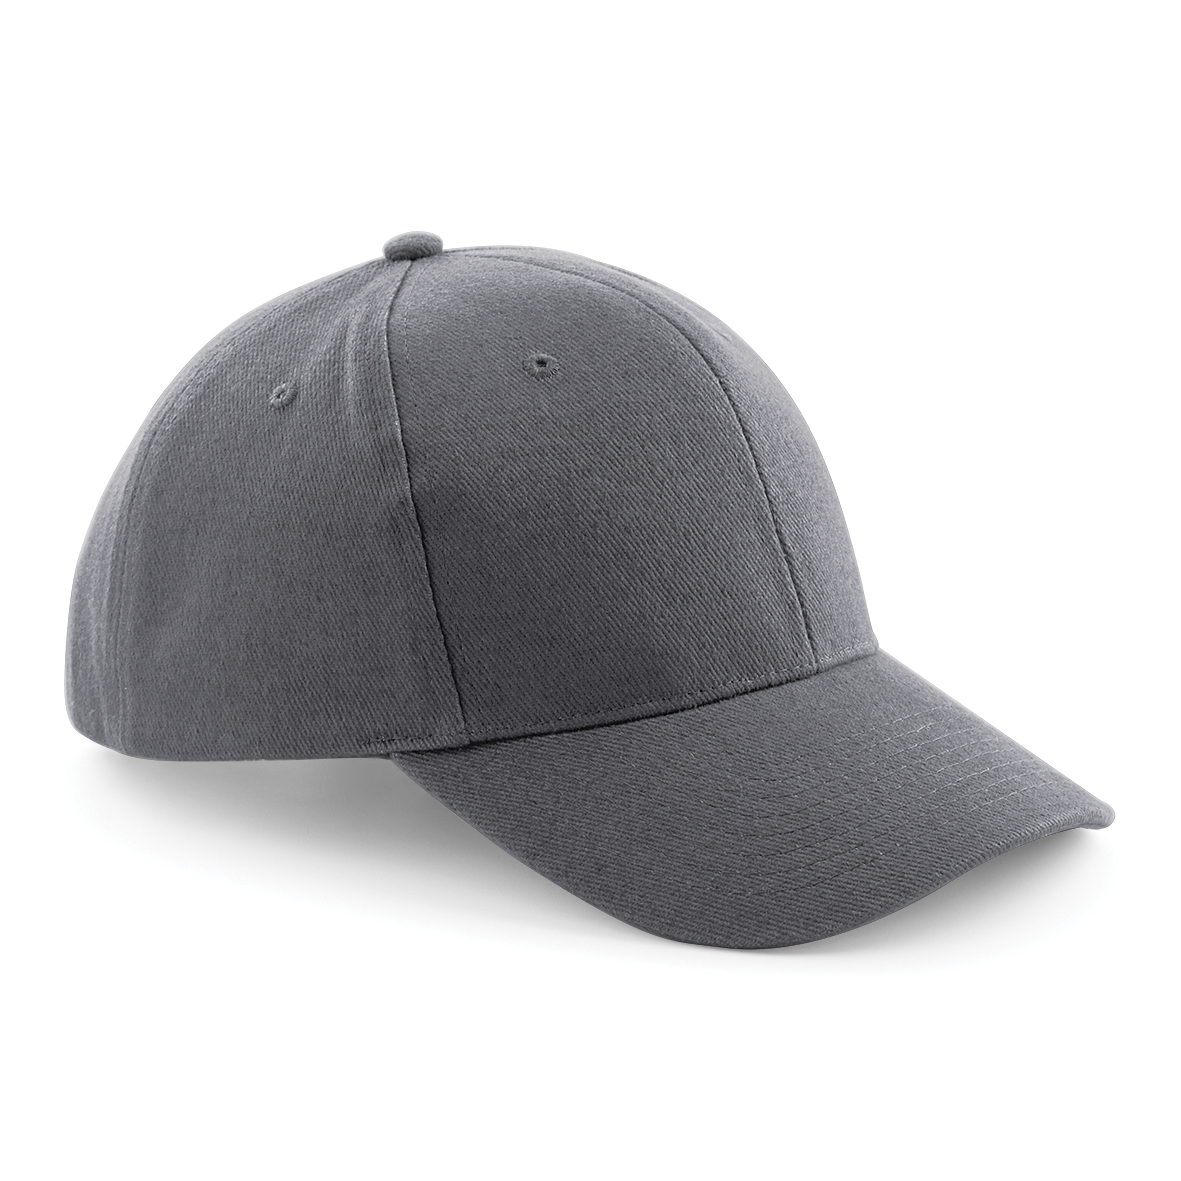 Pro-Style Heavy Brushed Cotton Cap in grey